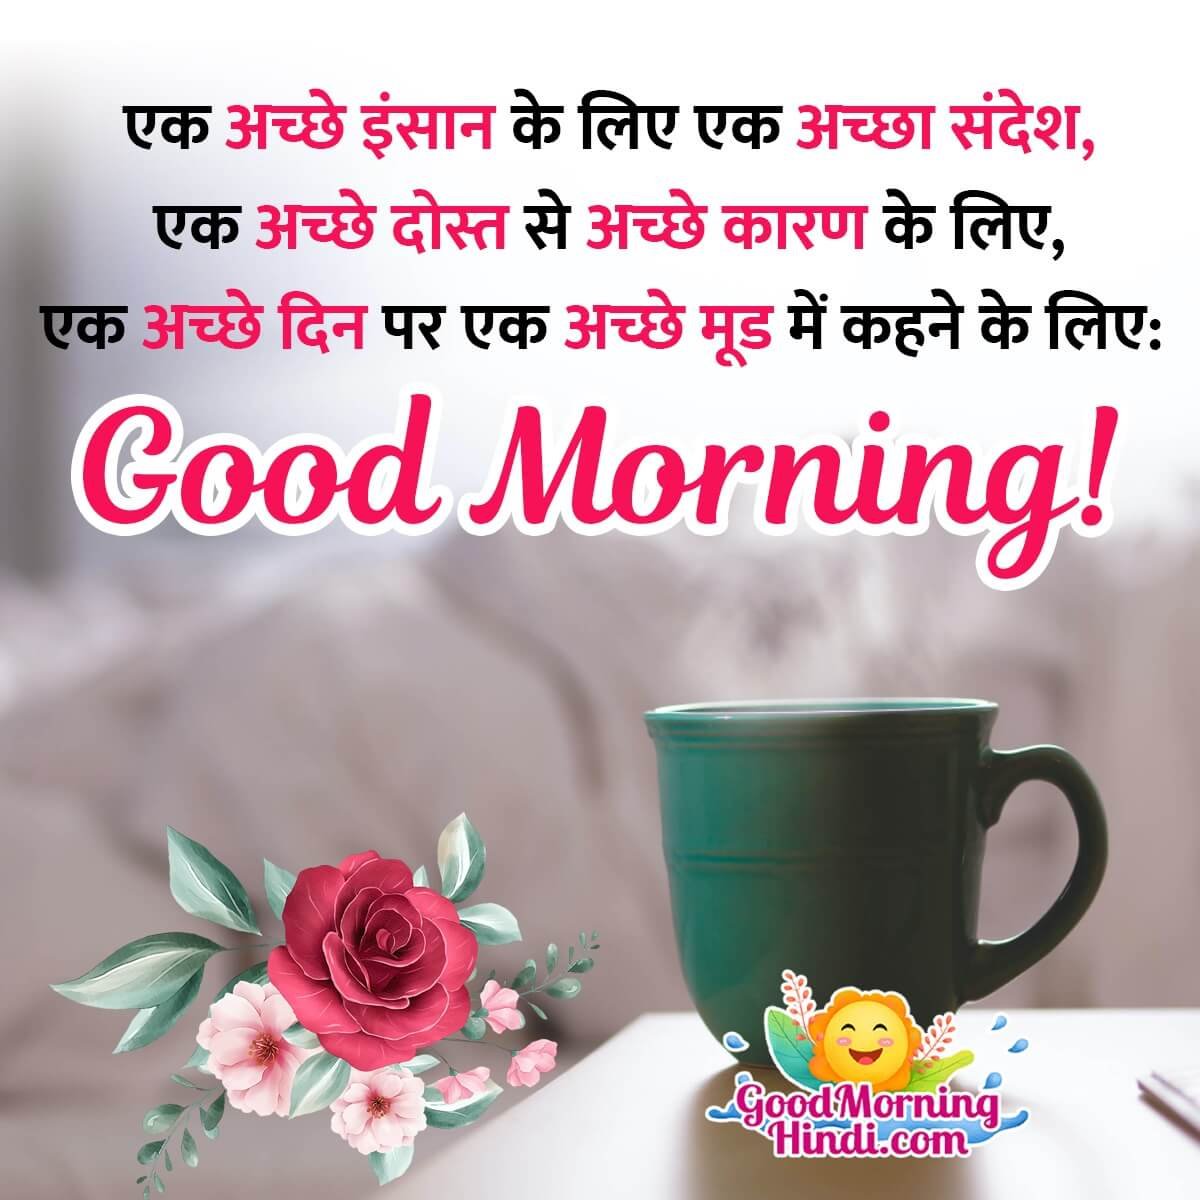 Good Morning Hindi Wishes For Friend